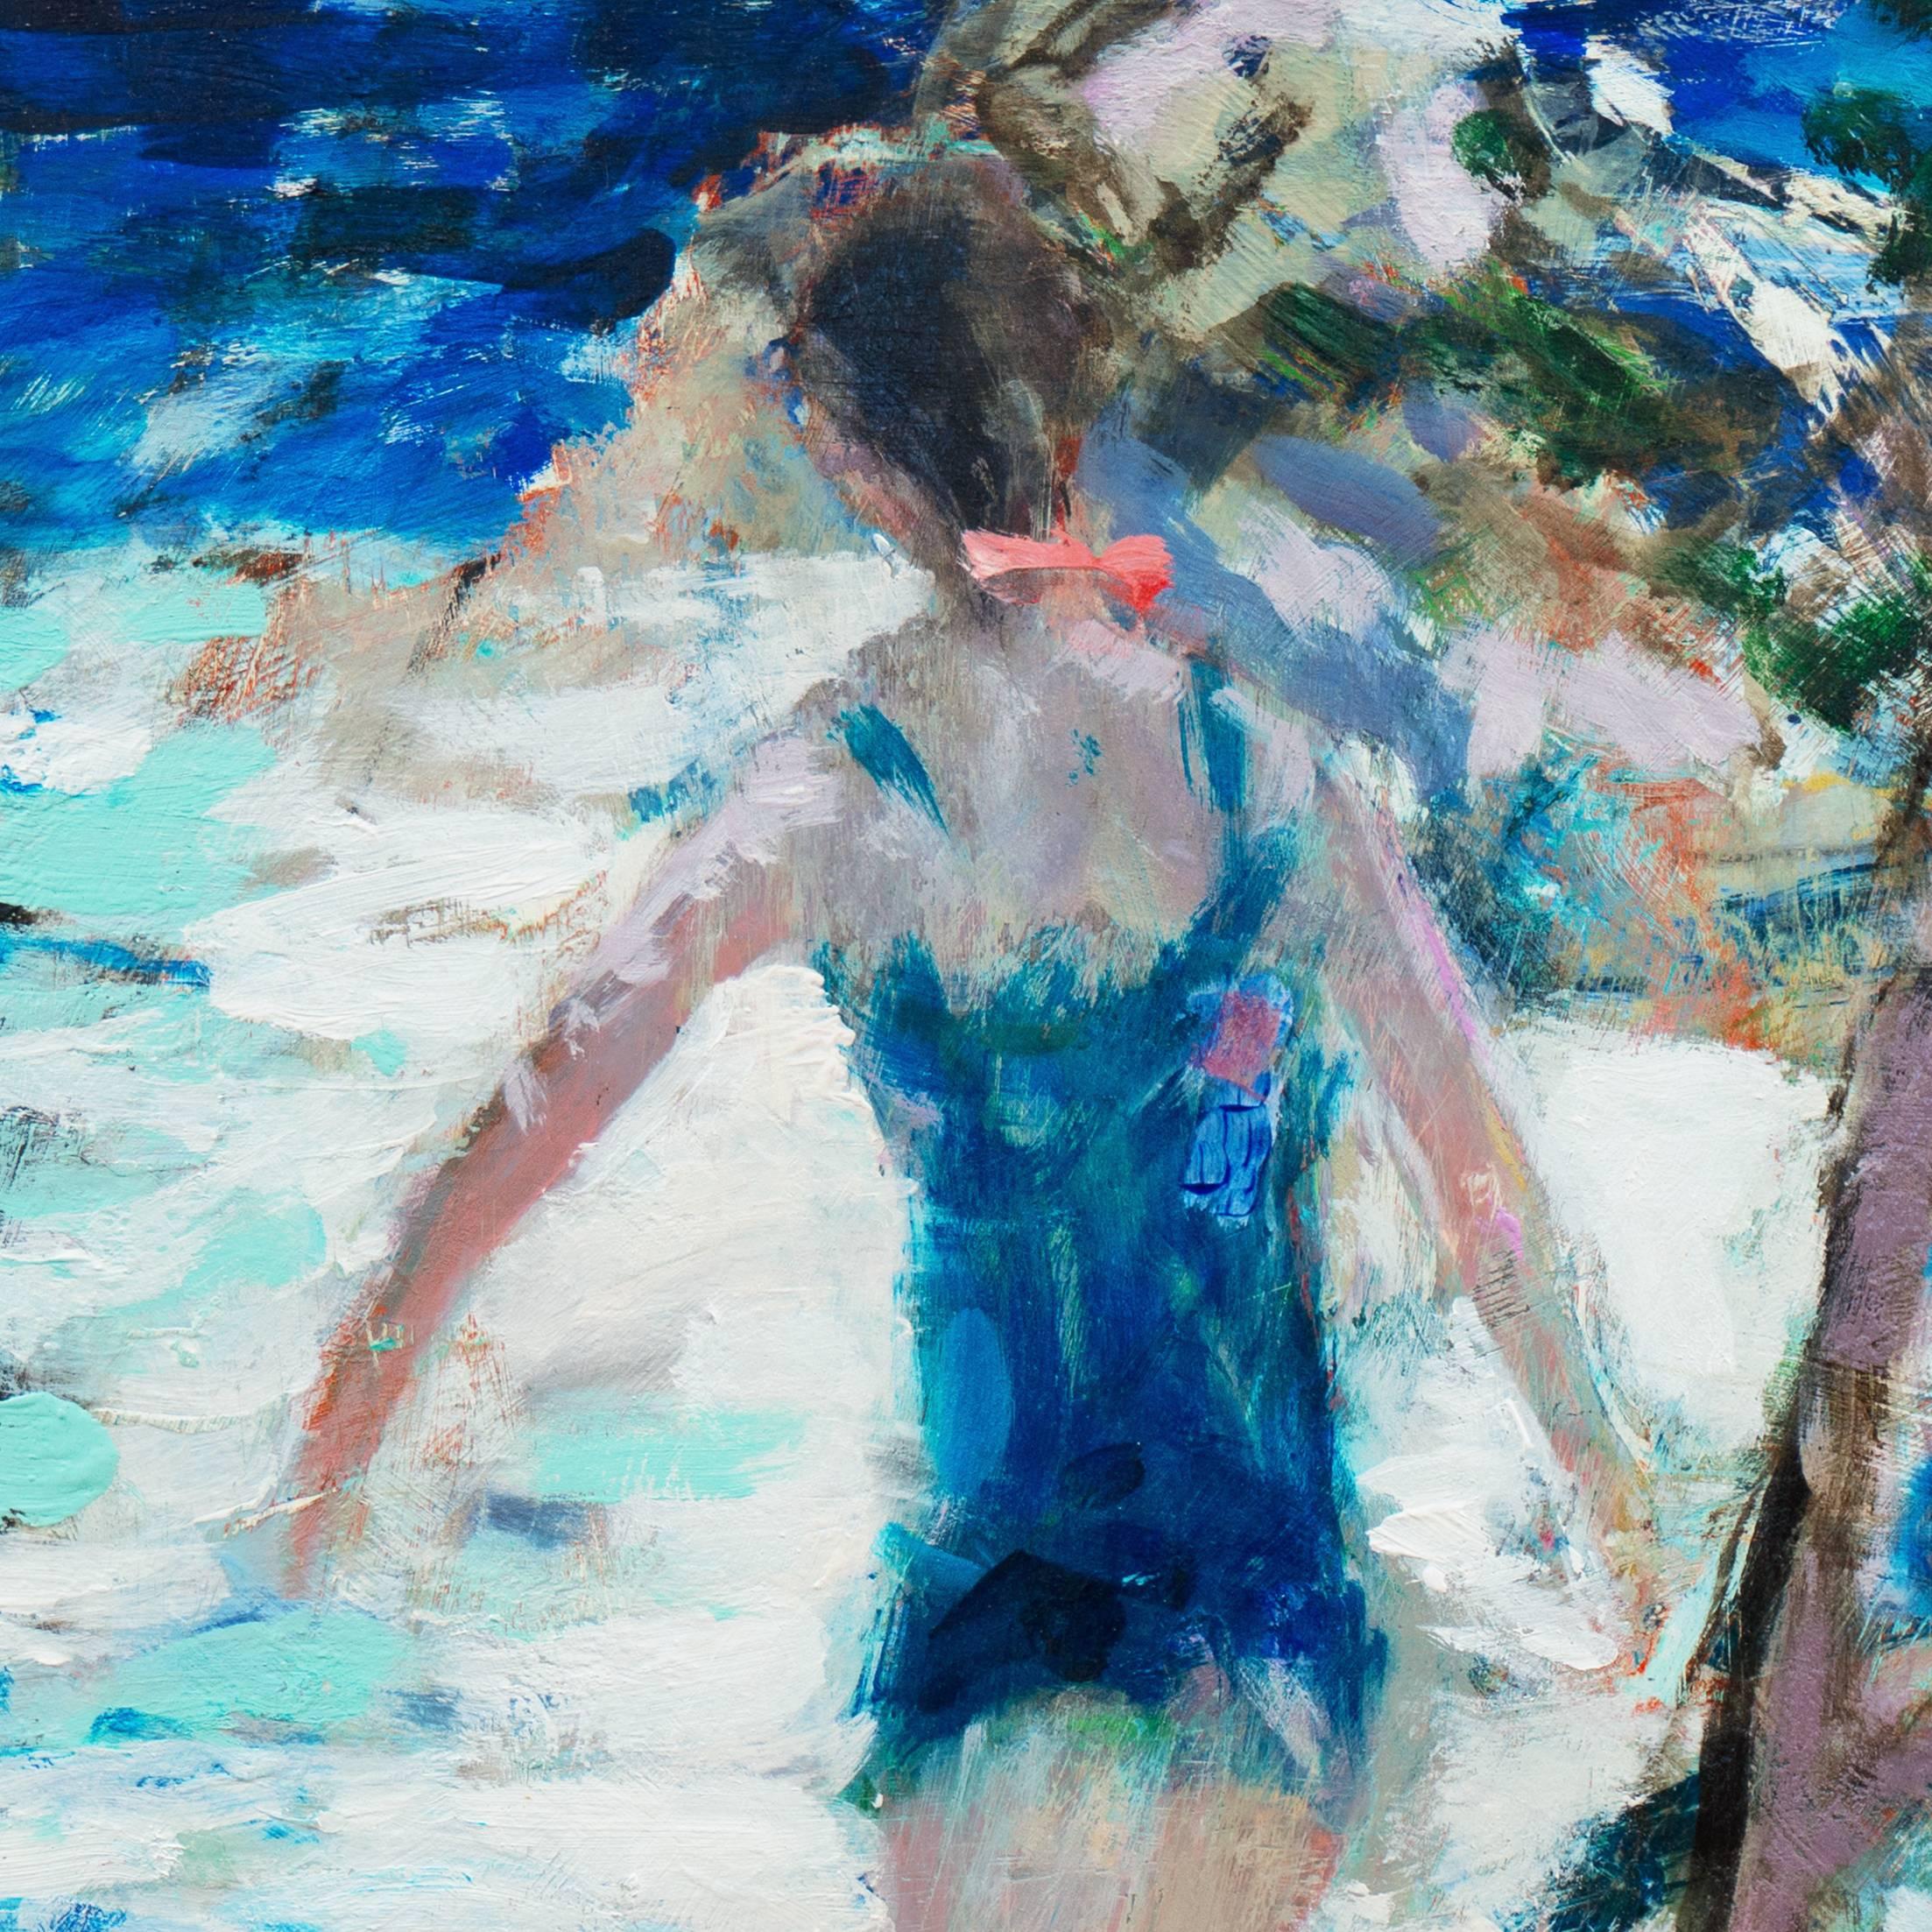 'Young Woman Bathing, Carmel', California Post-Impressionist, Stanford, Big Sur - Blue Landscape Painting by Robert Canete